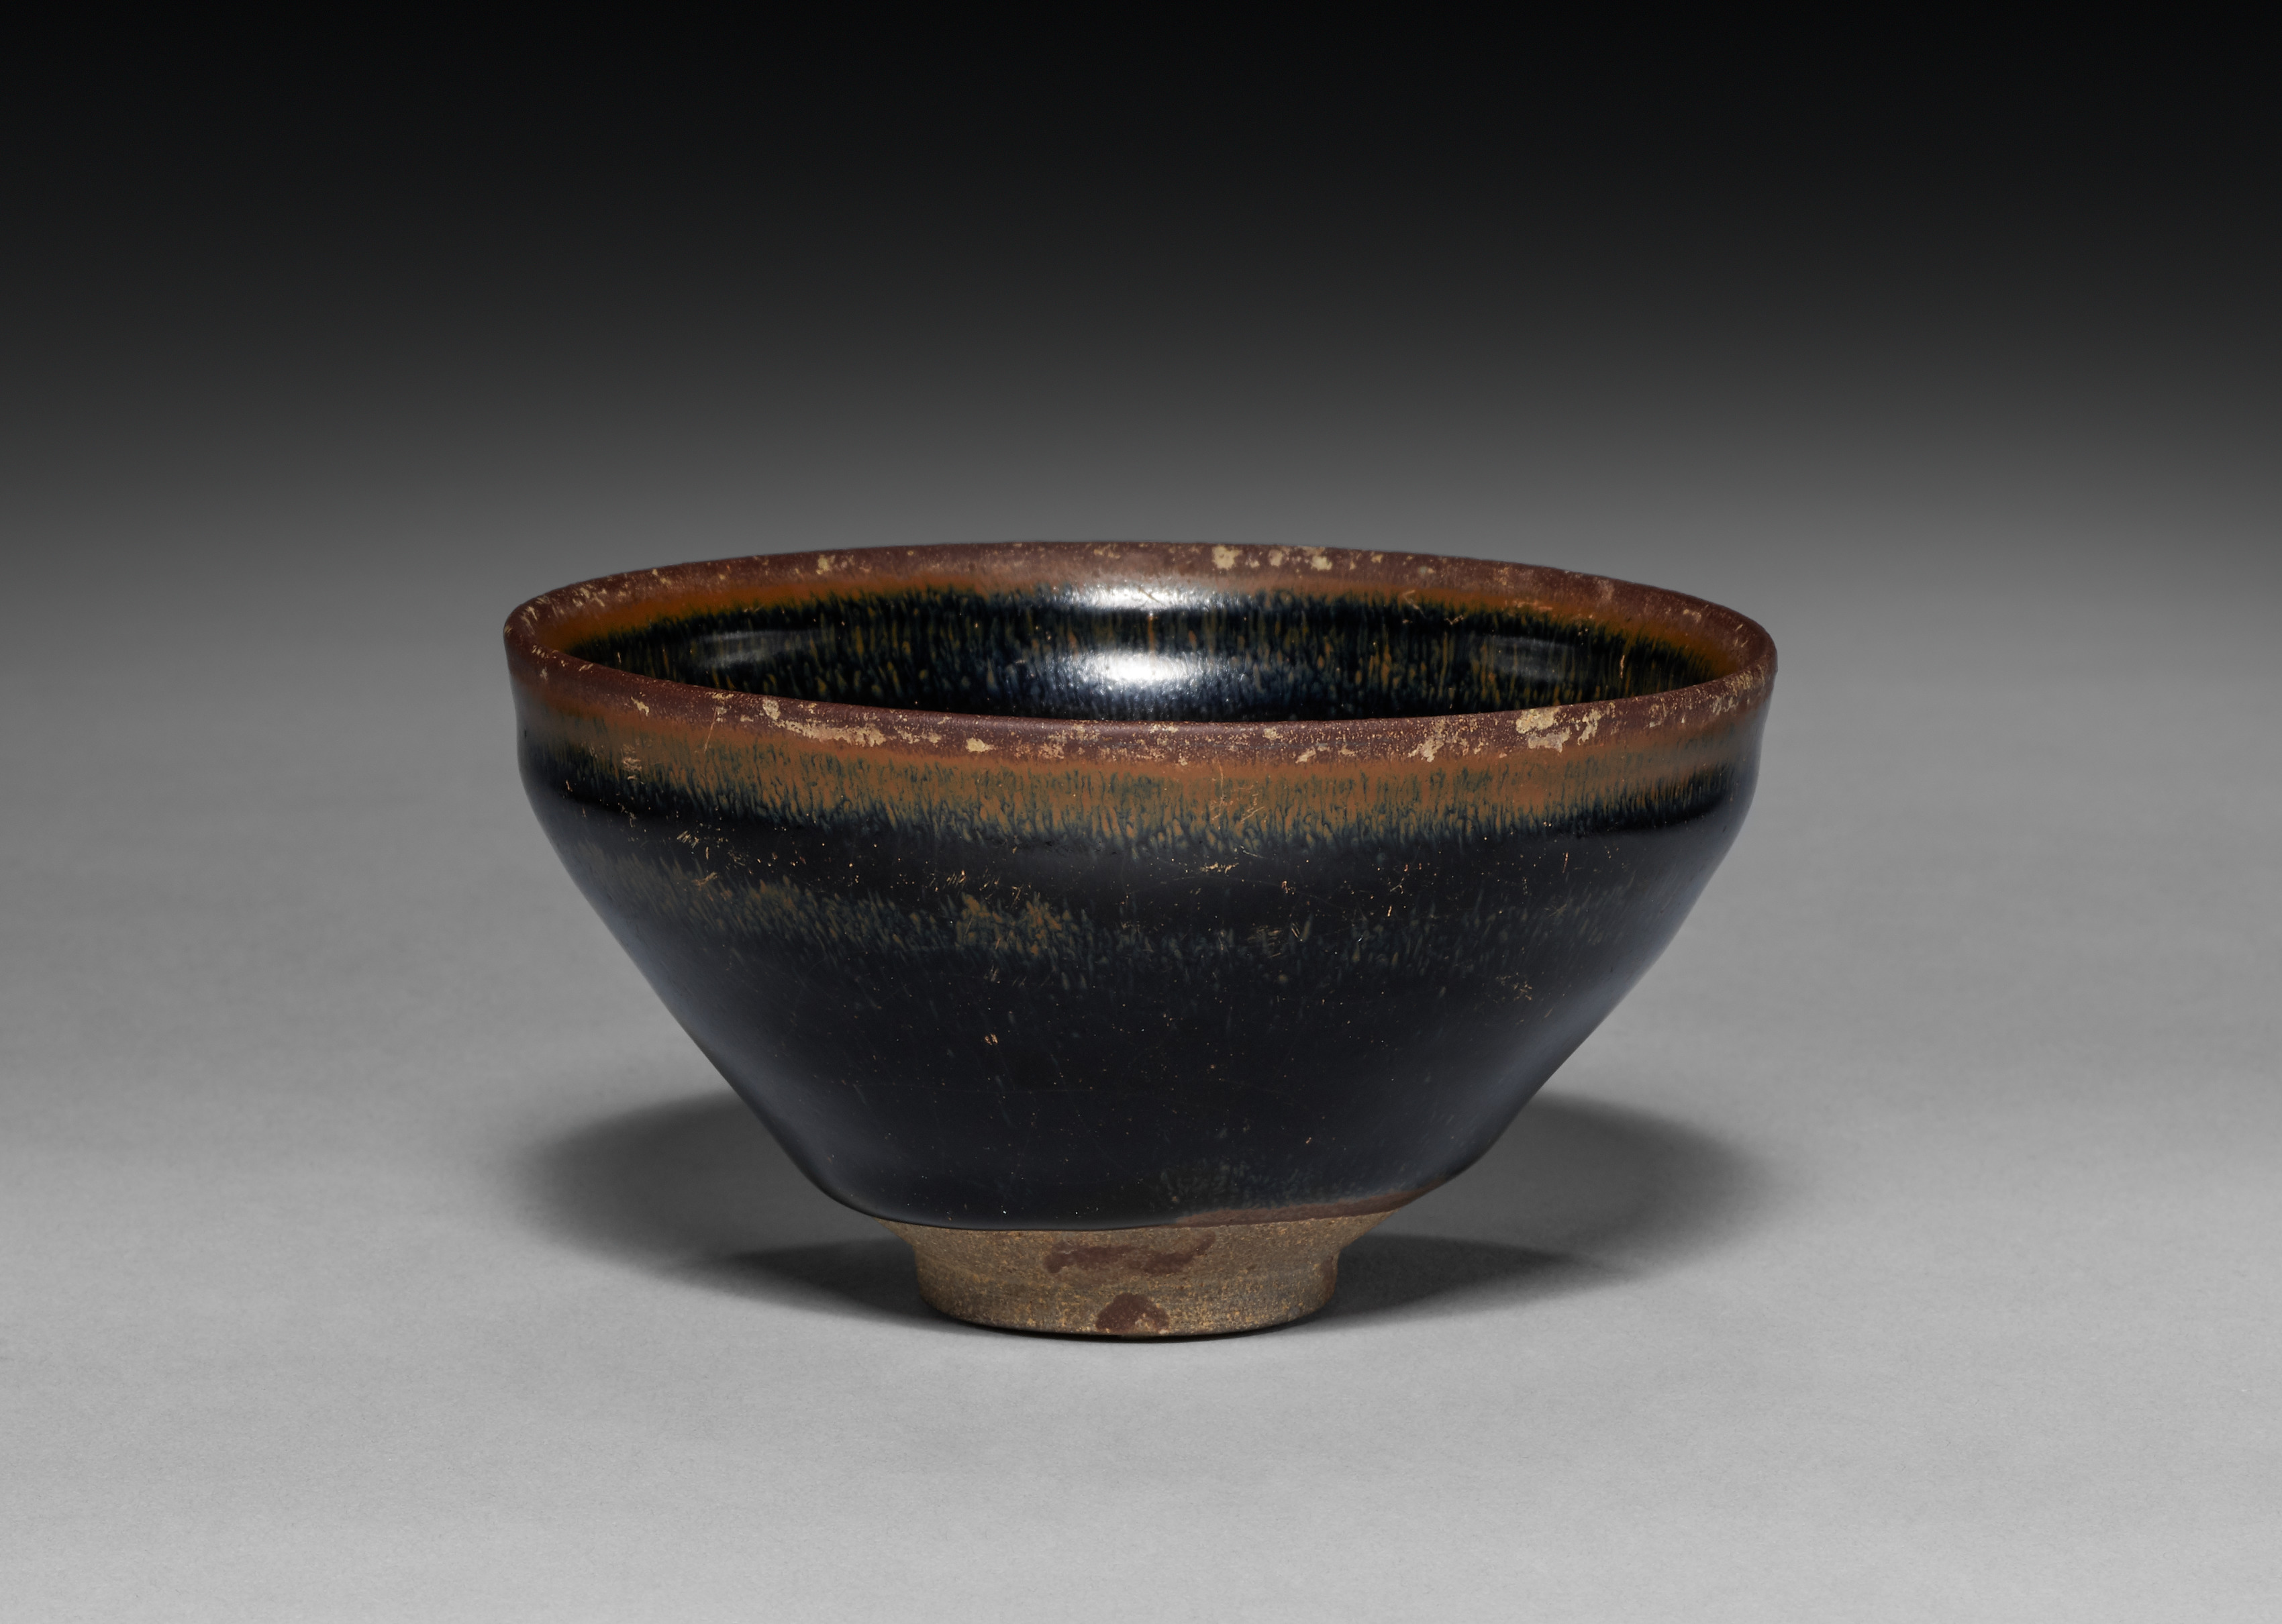 Black-Glazed Teabowl with Incised Characters (供御) for “Imperial Tribute”